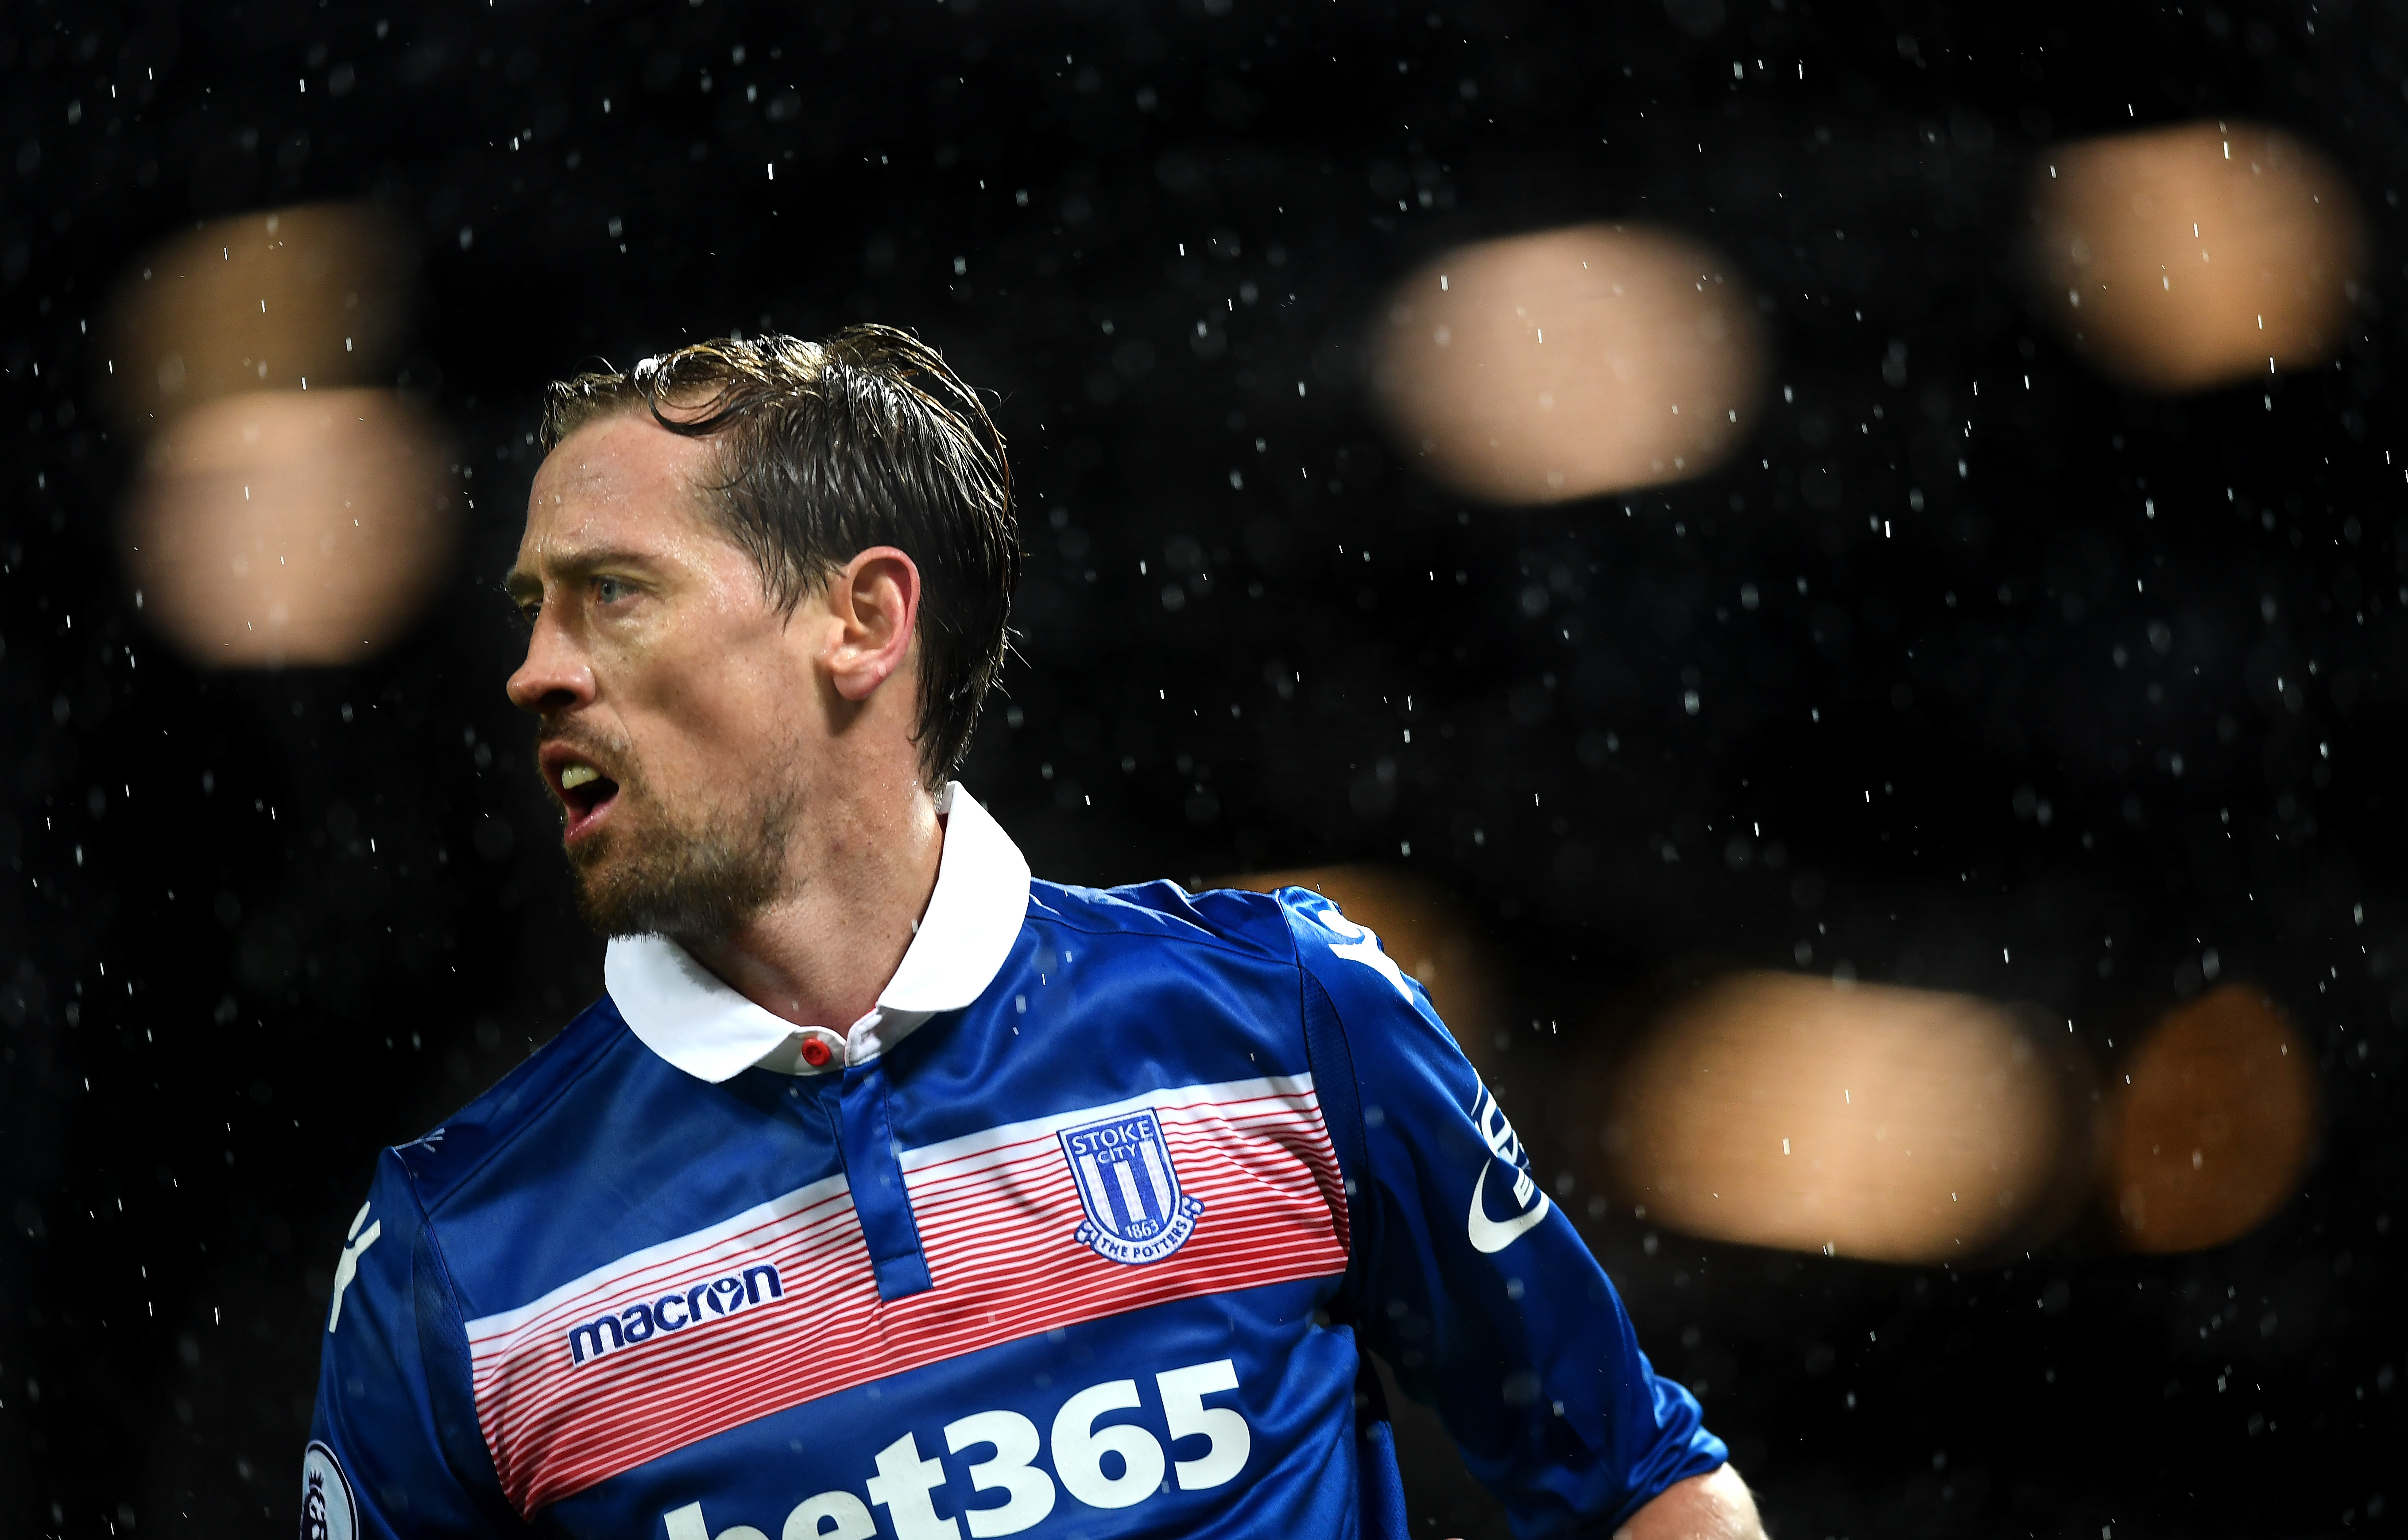 MANCHESTER, ENGLAND - JANUARY 15:  Peter Crouch of Stoke City looks on during the Premier League match between Manchester United and Stoke City at Old Trafford on January 15, 2018 in Manchester, England.  (Photo by Michael Regan/Getty Images)